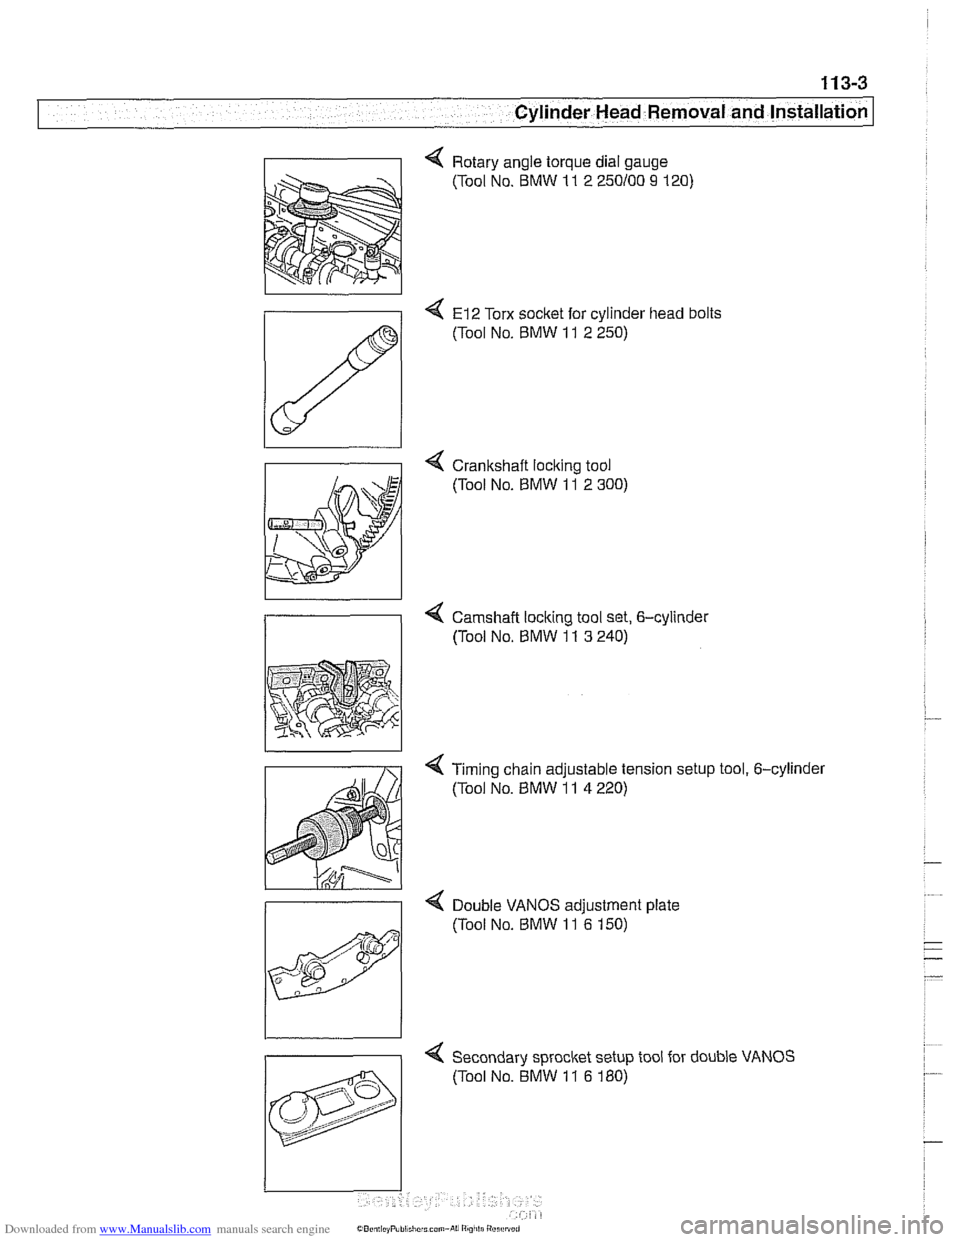 BMW 540i 1997 E39 Workshop Manual Downloaded from www.Manualslib.com manuals search engine 
11 3-3 
Cylinder Head Removal and Installation 
4 Rotary  angle torque  dial gauge 
(Tool  No. BMW 
11 2 250100 9 120) 
4 El2 Torx  socket  fo